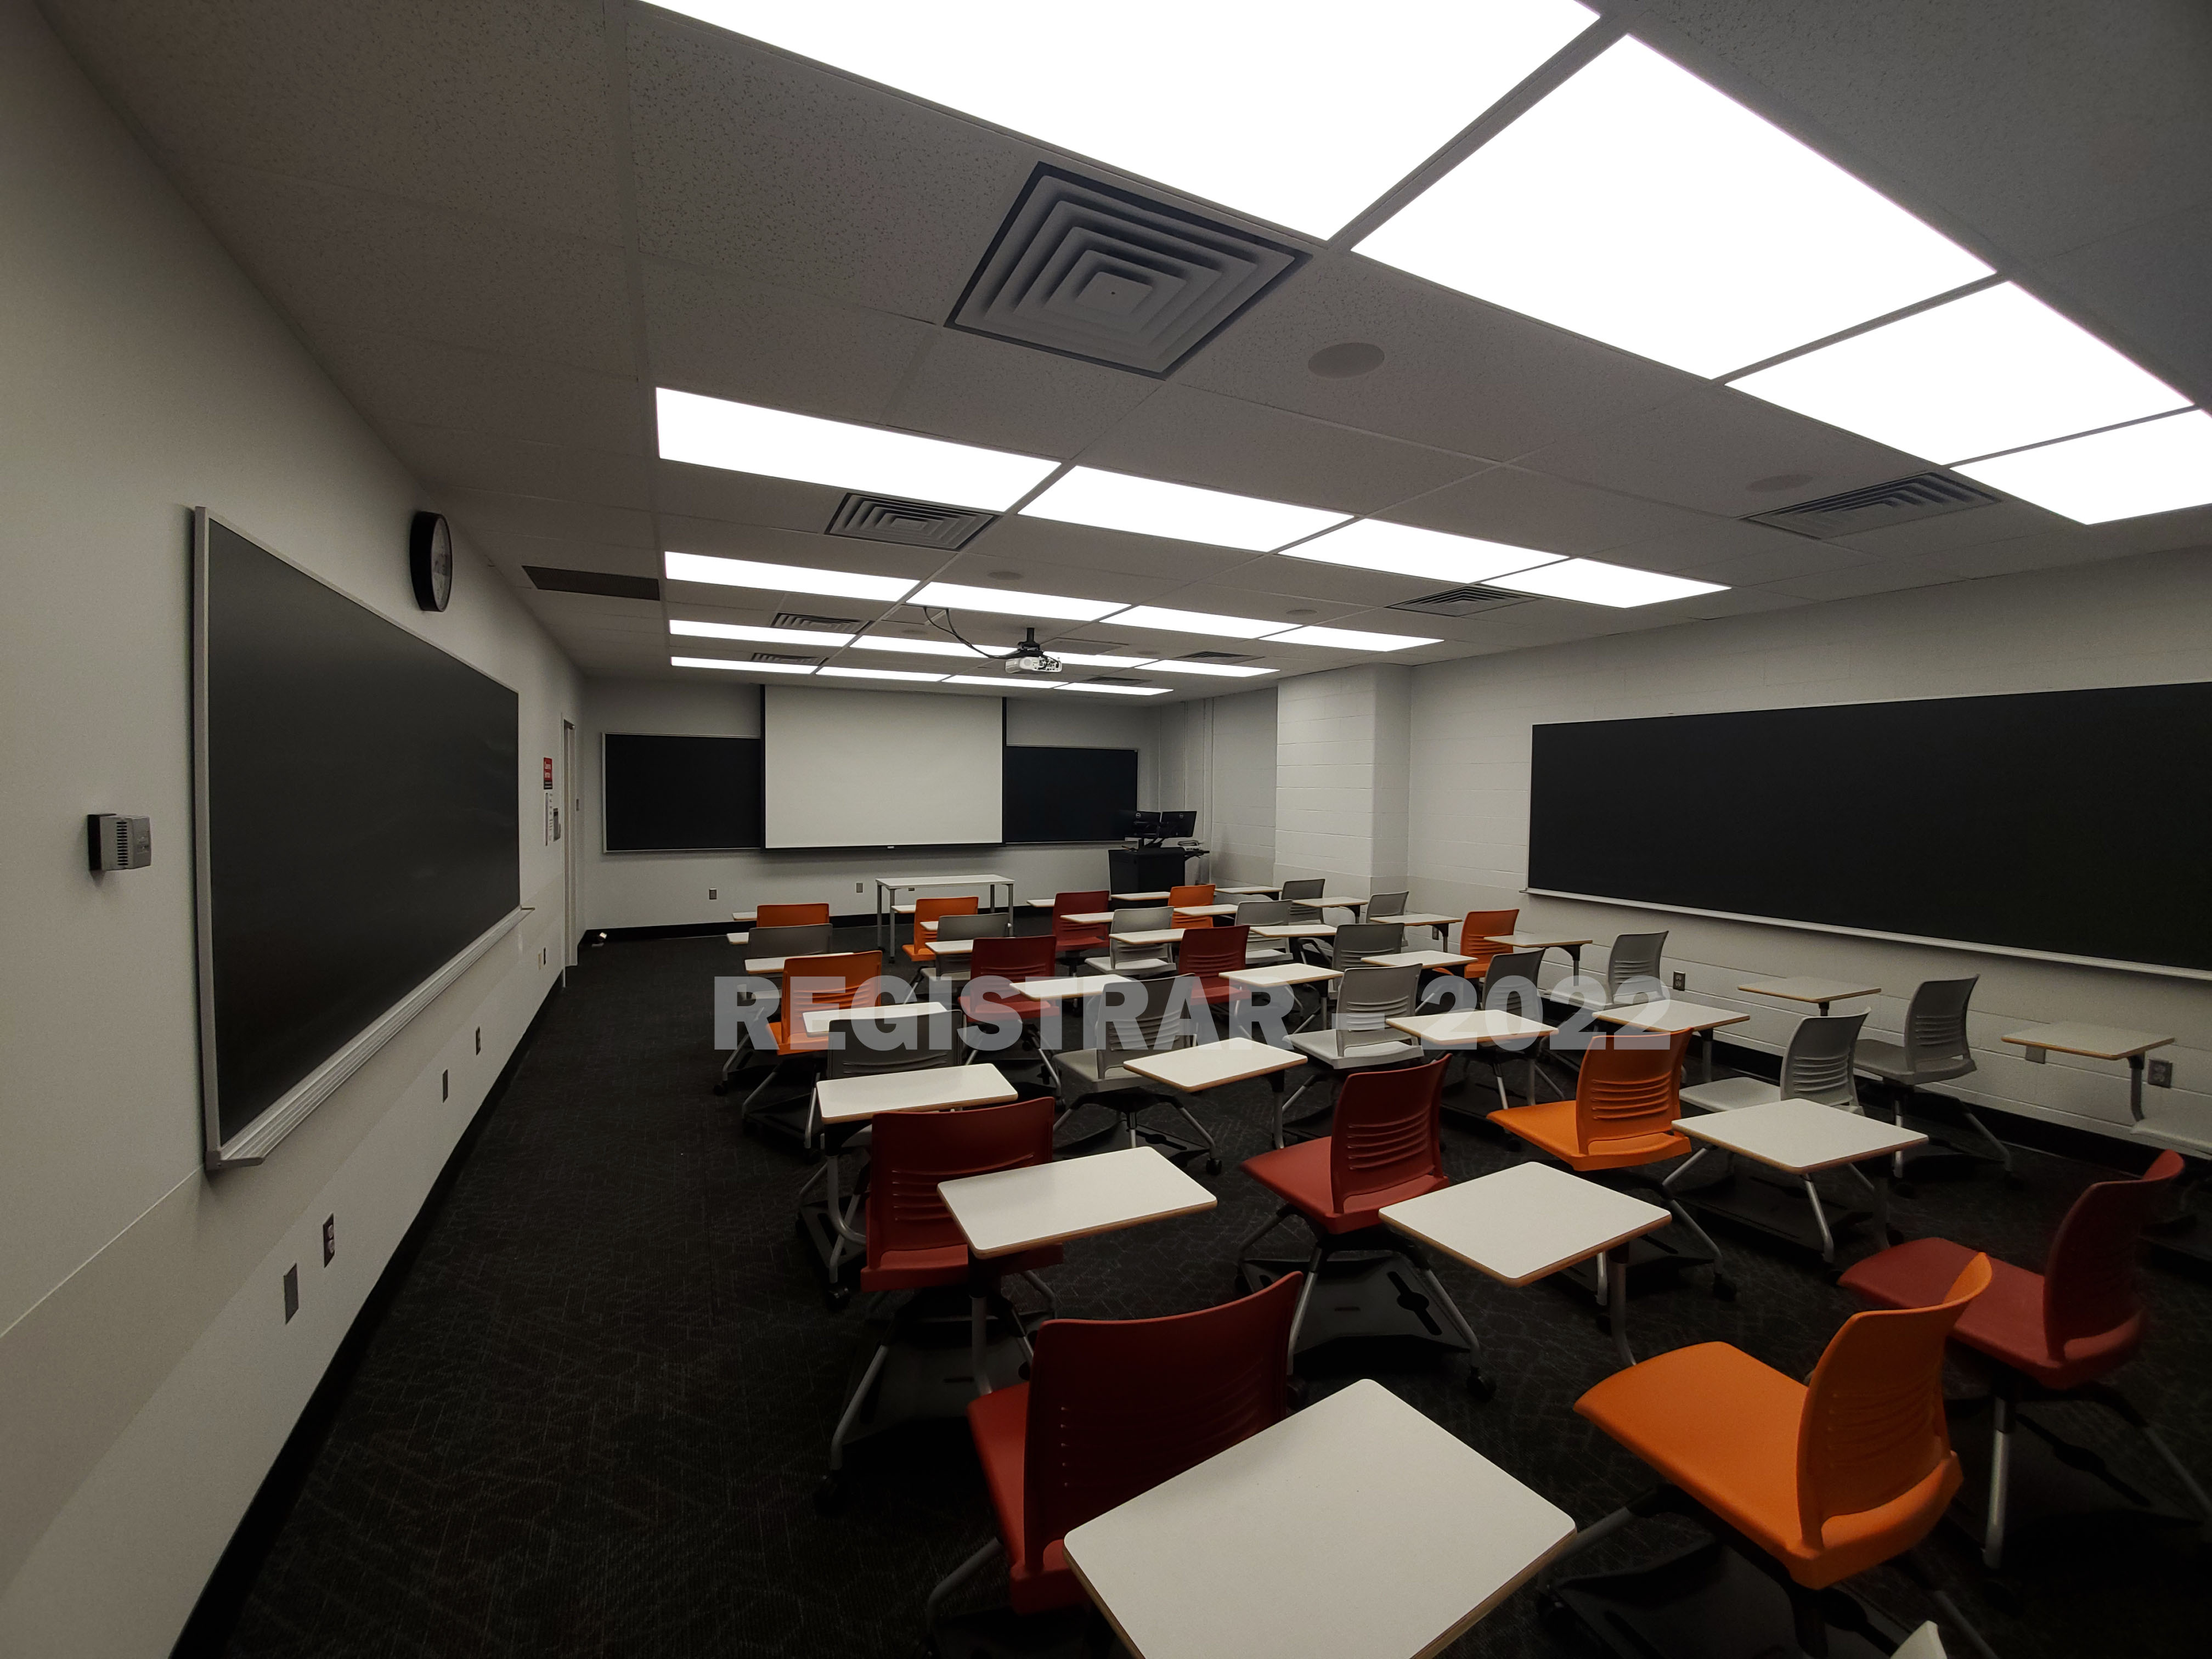 Journalism Building room 353 ultra wide angle view from the back of the room with projector screen down